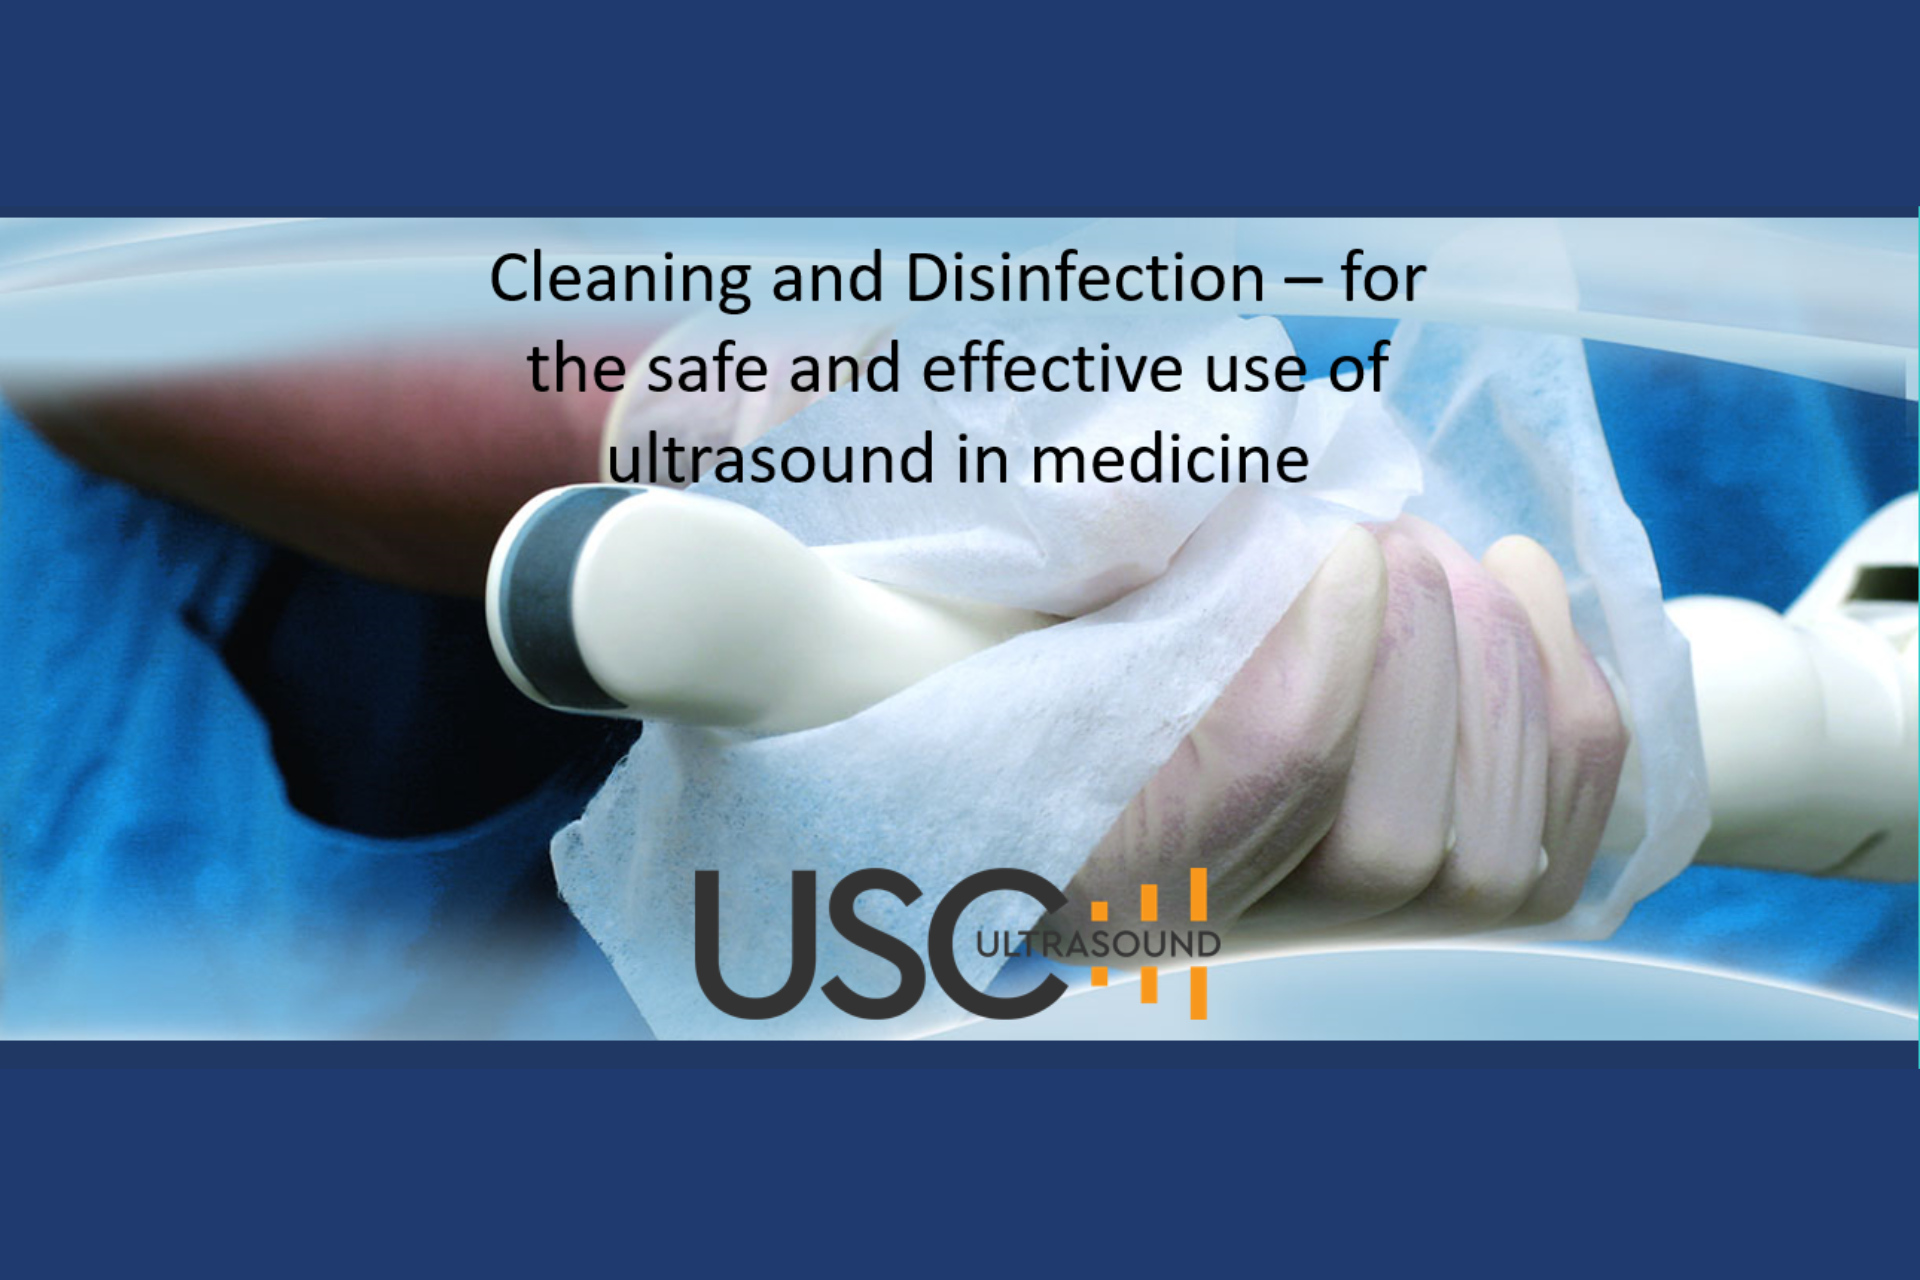 Cleaning and Disinfection for the Safe and Effective Use of Ultrasound